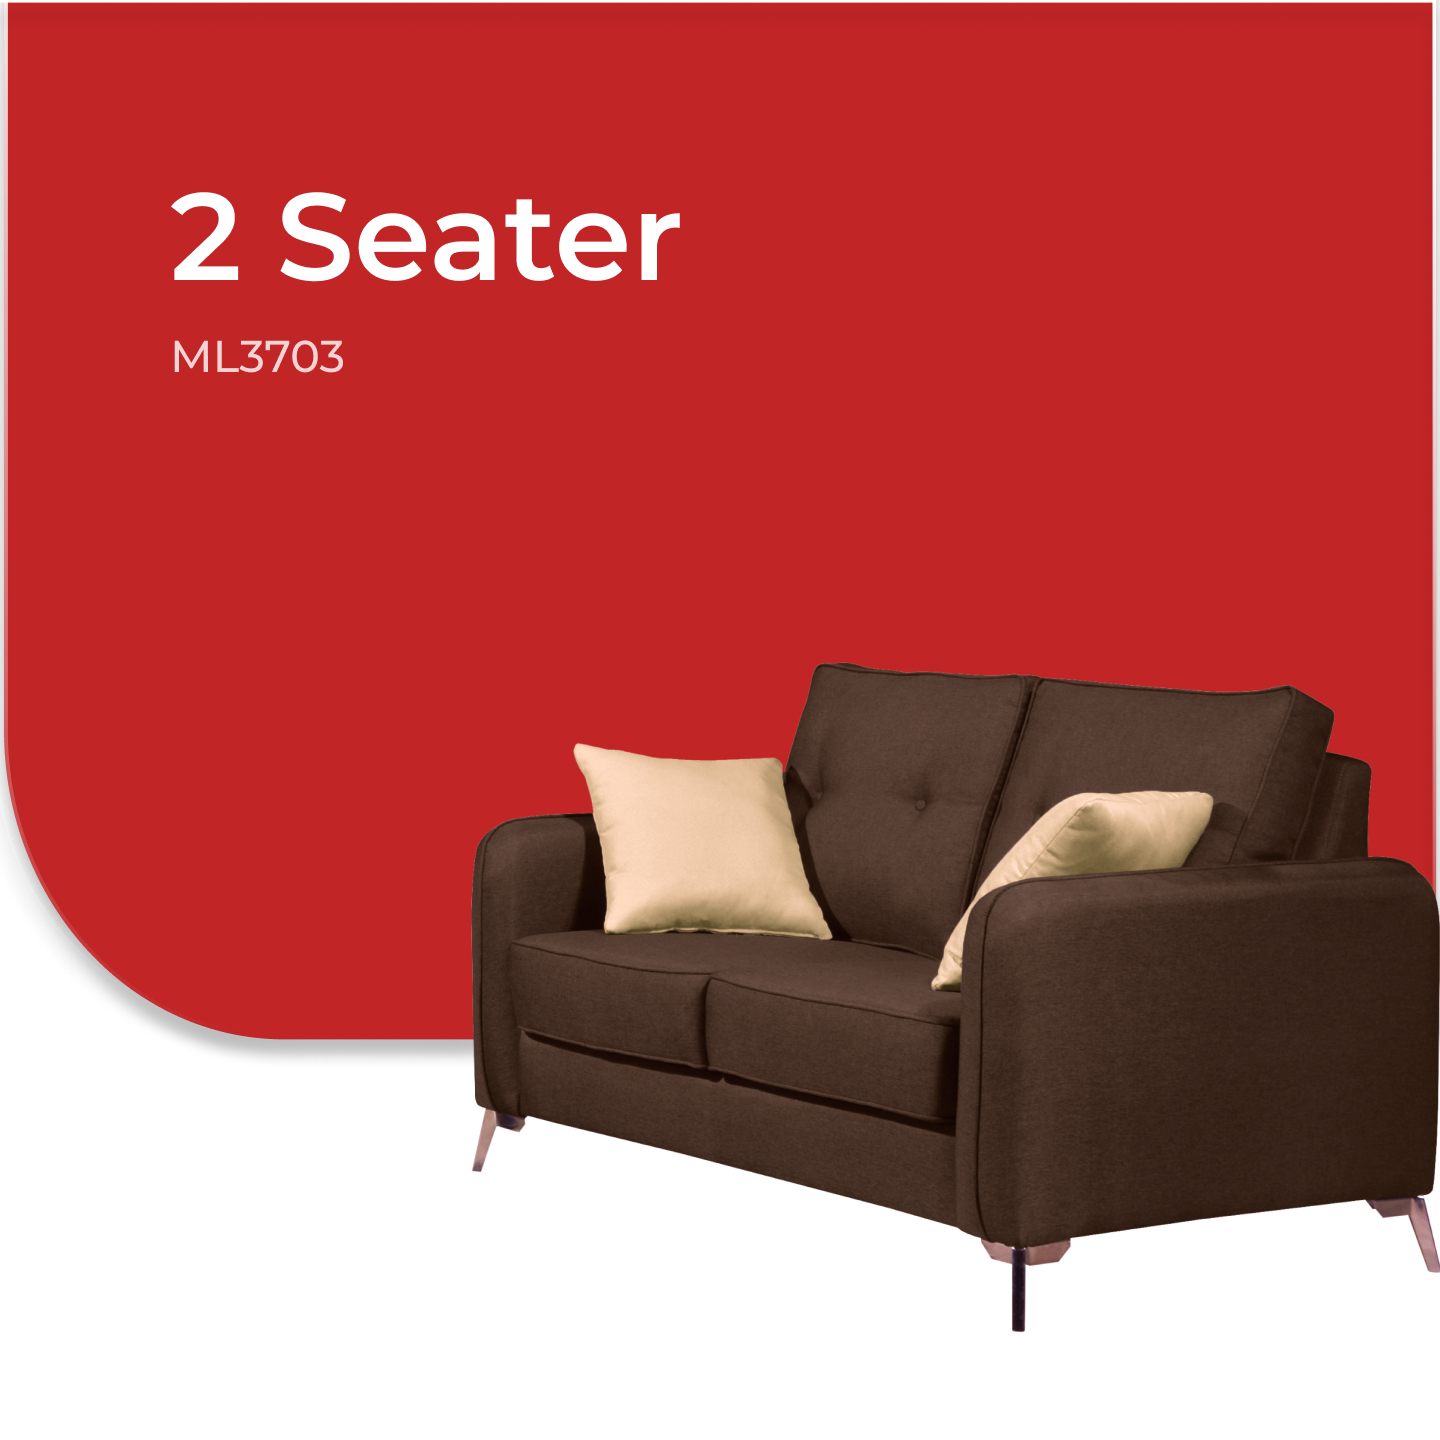 Goodnite Fabric Sofa (ML3703), 1 Seater/ 2 Seater/ 3 Seater/ 2+3 Seater, 3  Years Warranty – Goodnite Outlet